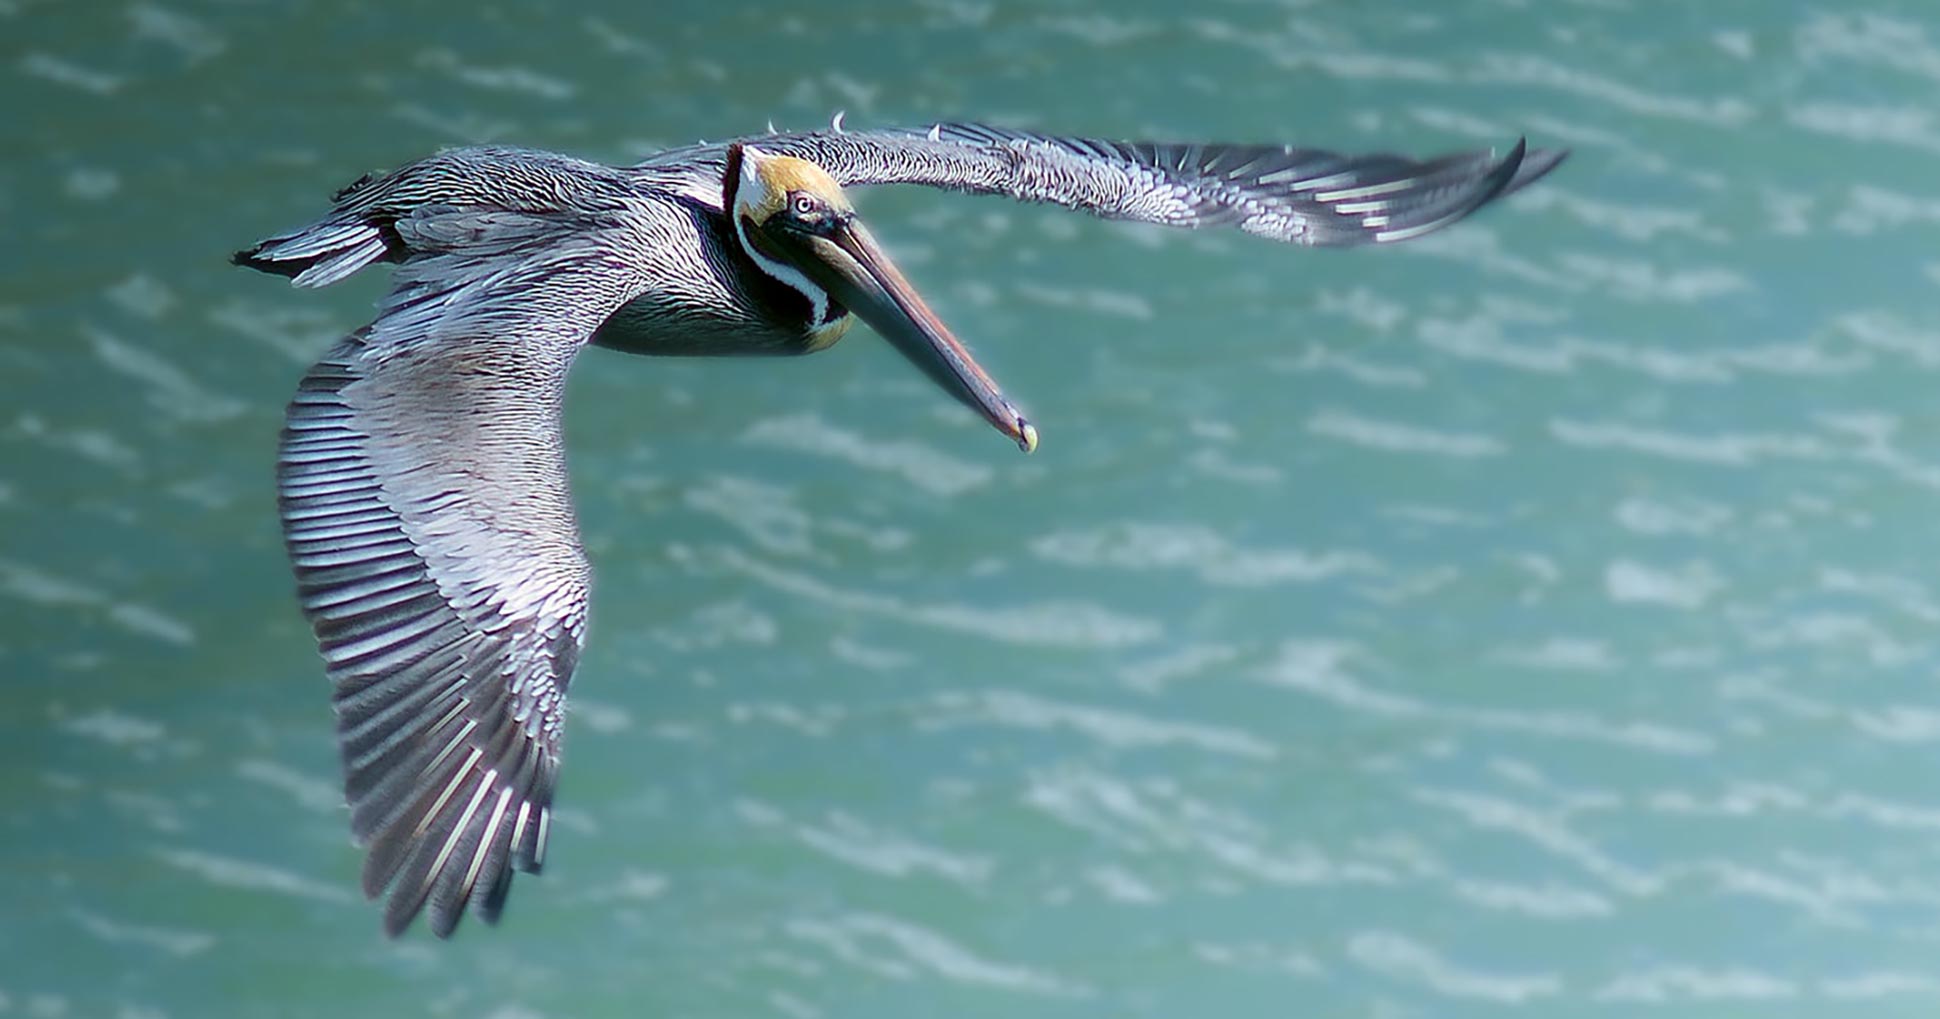 A pelican glides over the water in The Florida Keys & Key West, Florida, USA